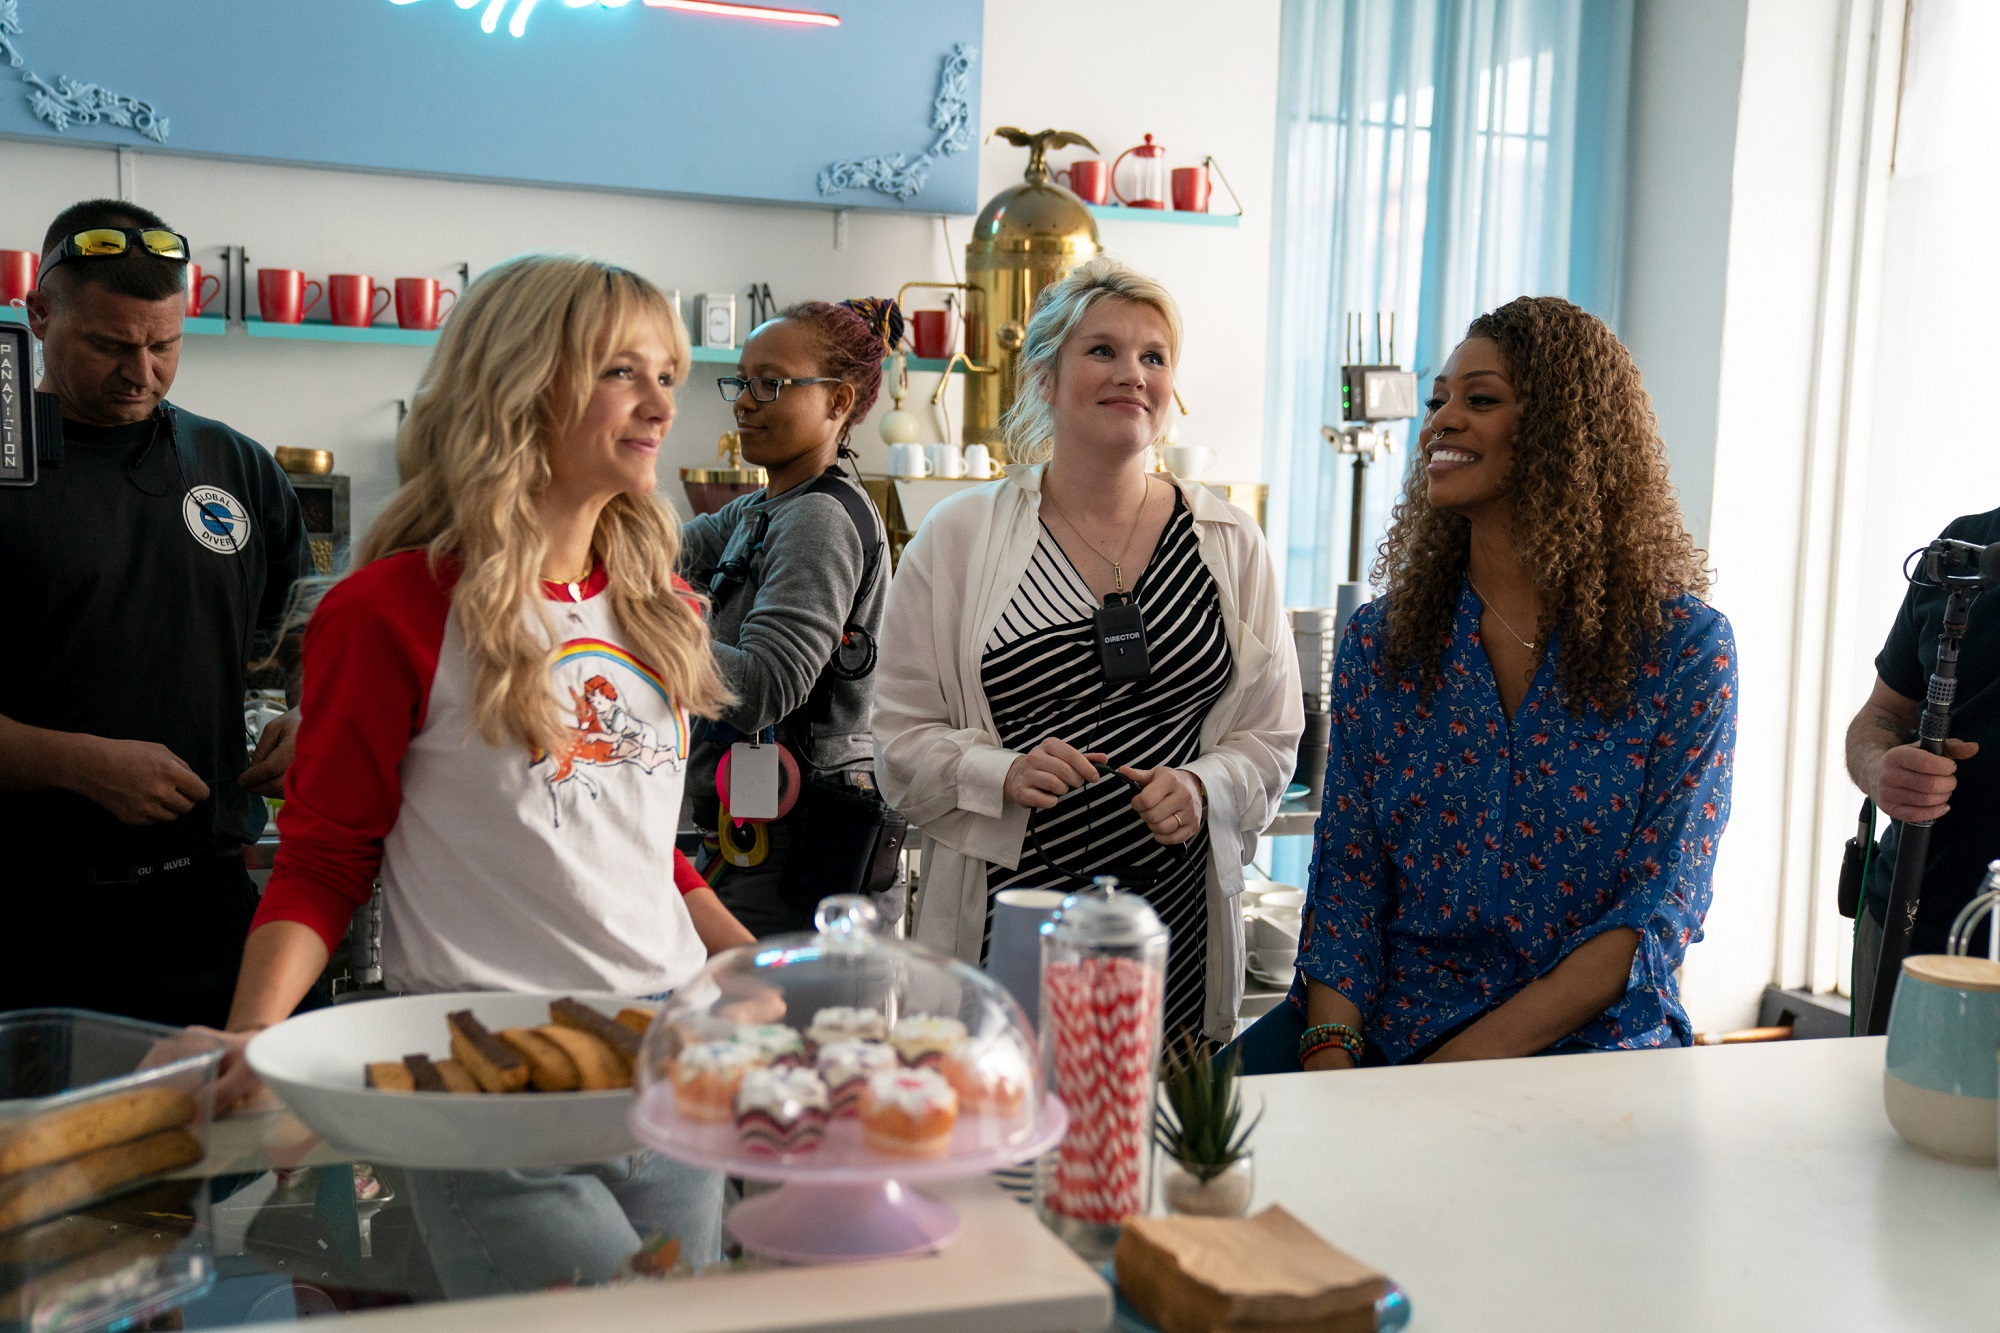 Emerald Fennell directing Carey Mulligan and Laverne Cox in the coffee shop